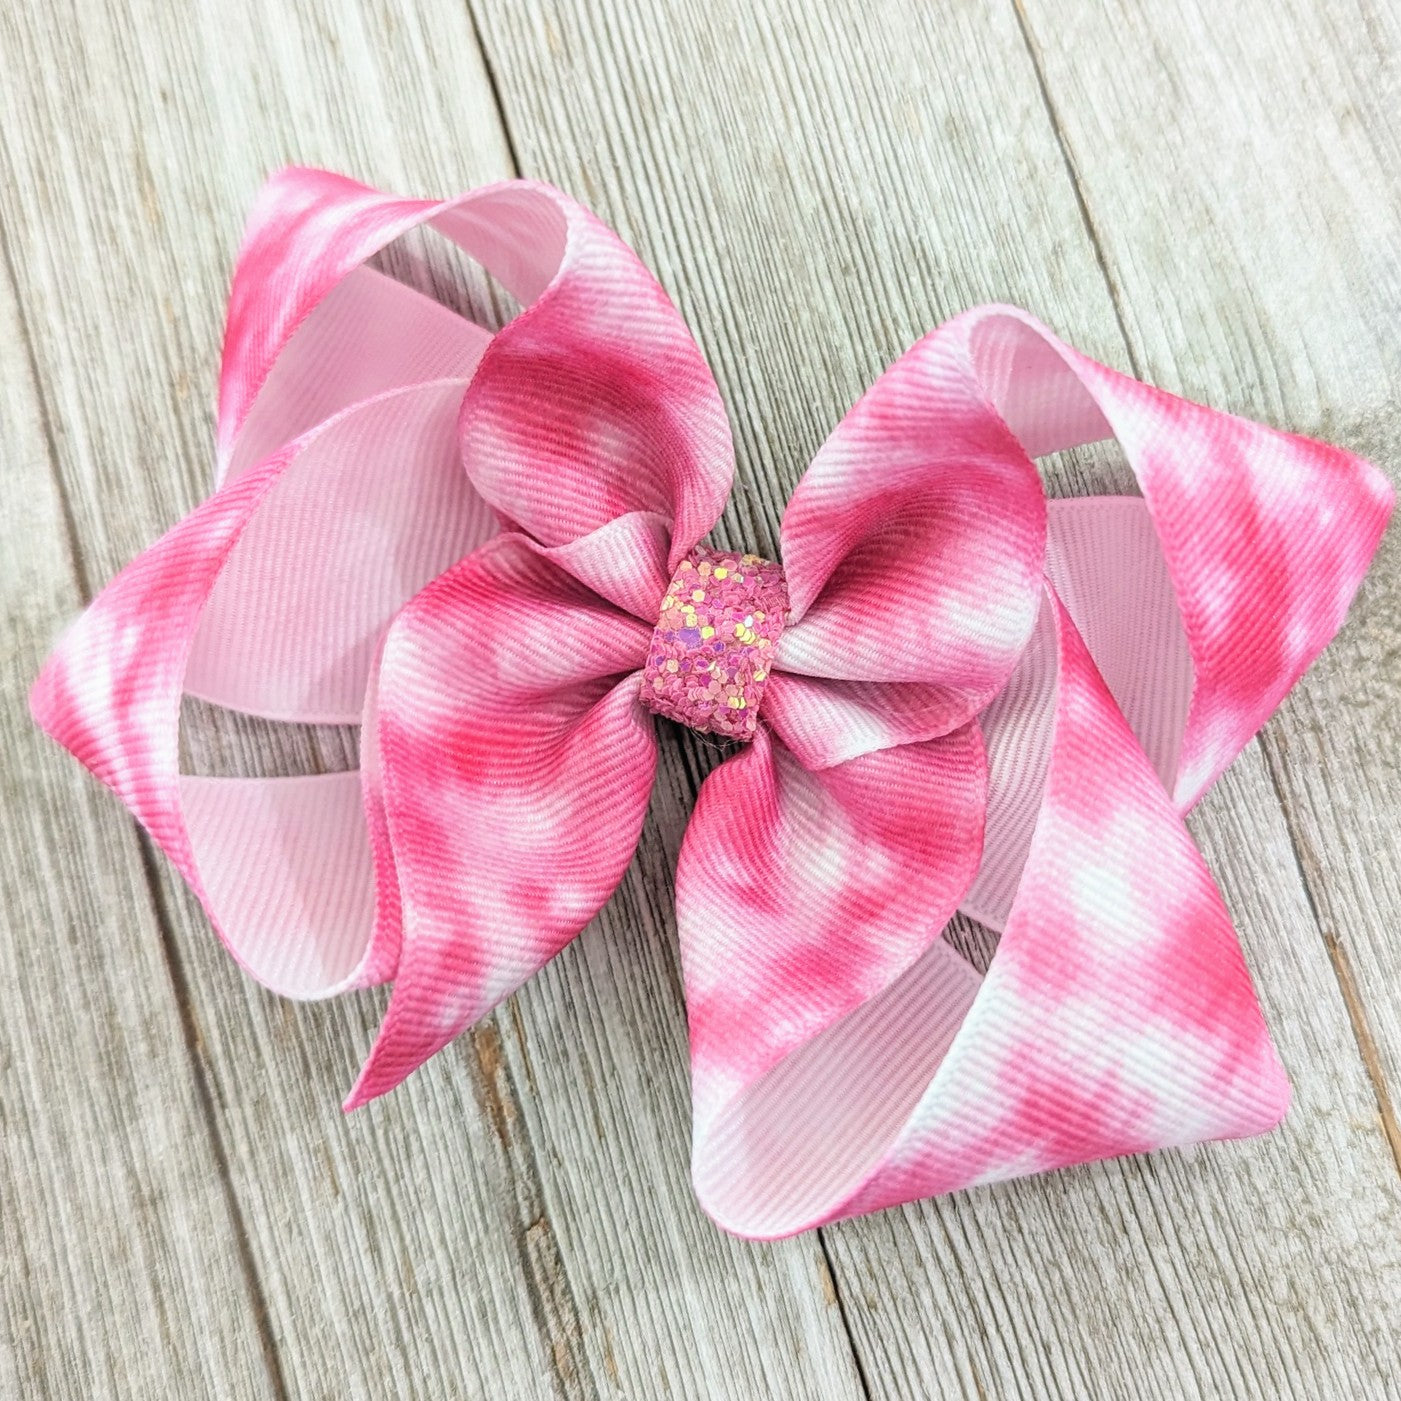 4" Pink Tie-Dye Breast Cancer Awareness Ribbon Hair Bow